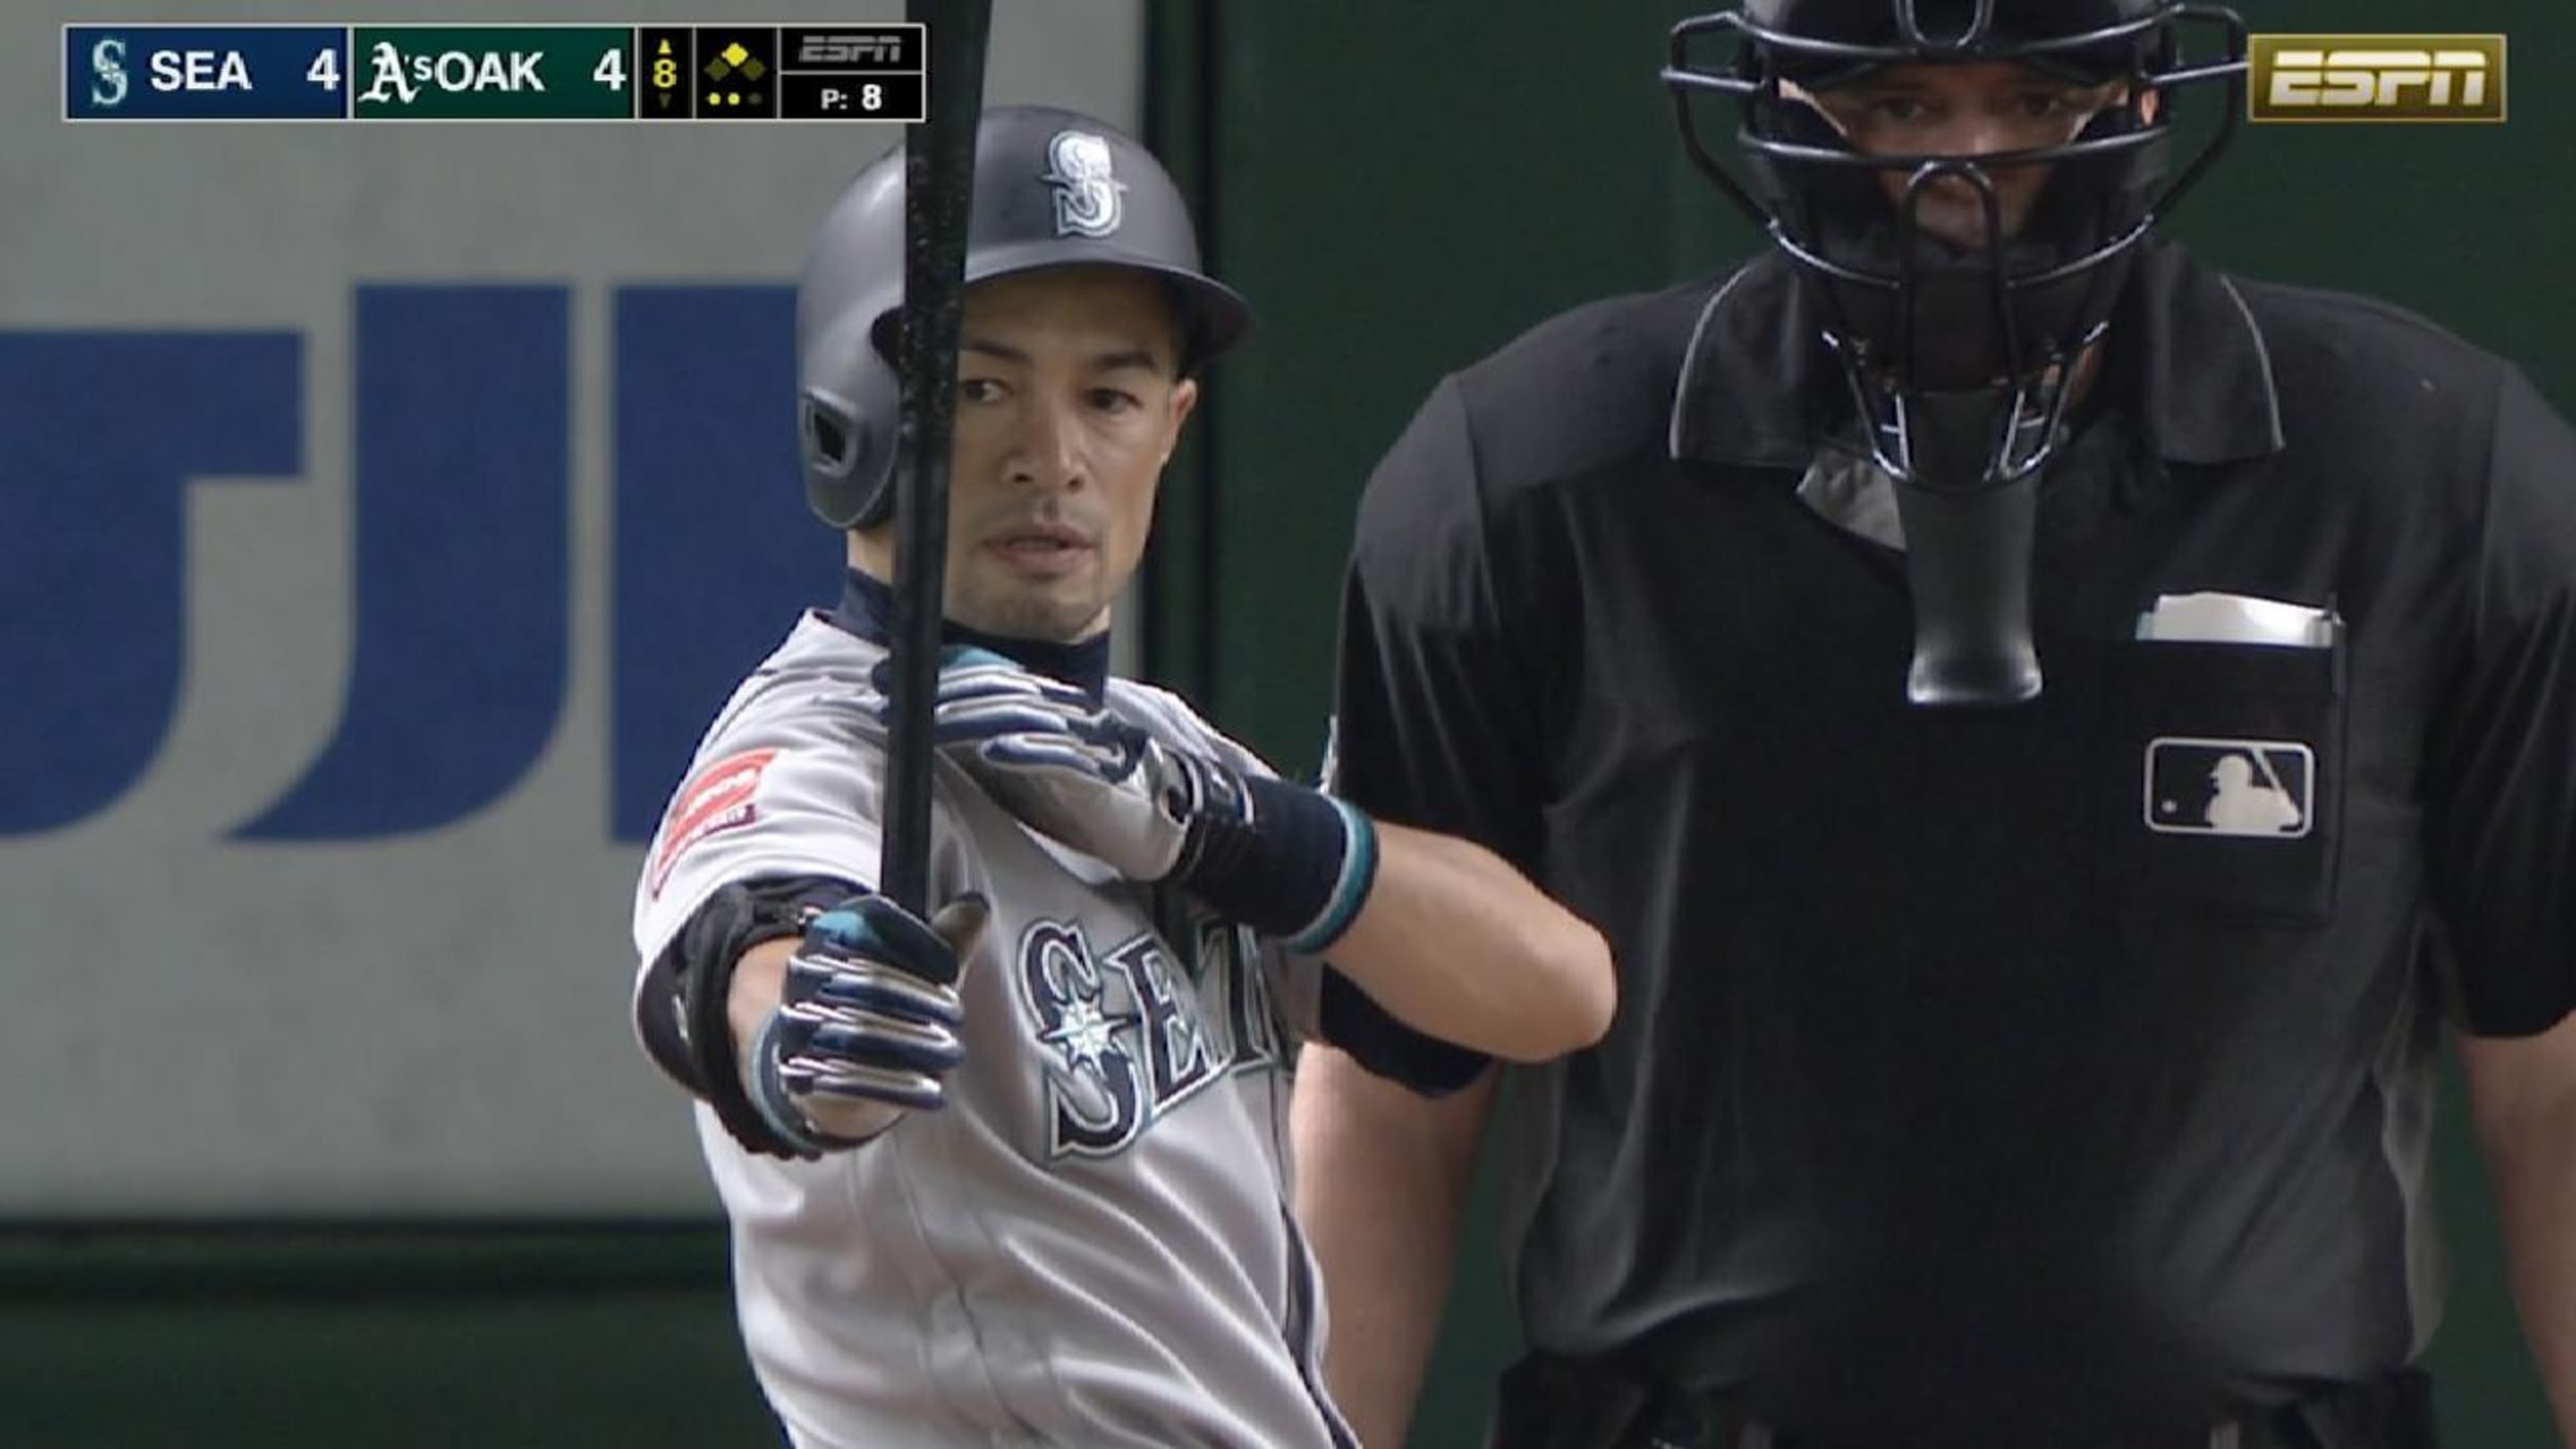 Ichiro says goodbye to adoring fans in final MLB game, Mariners